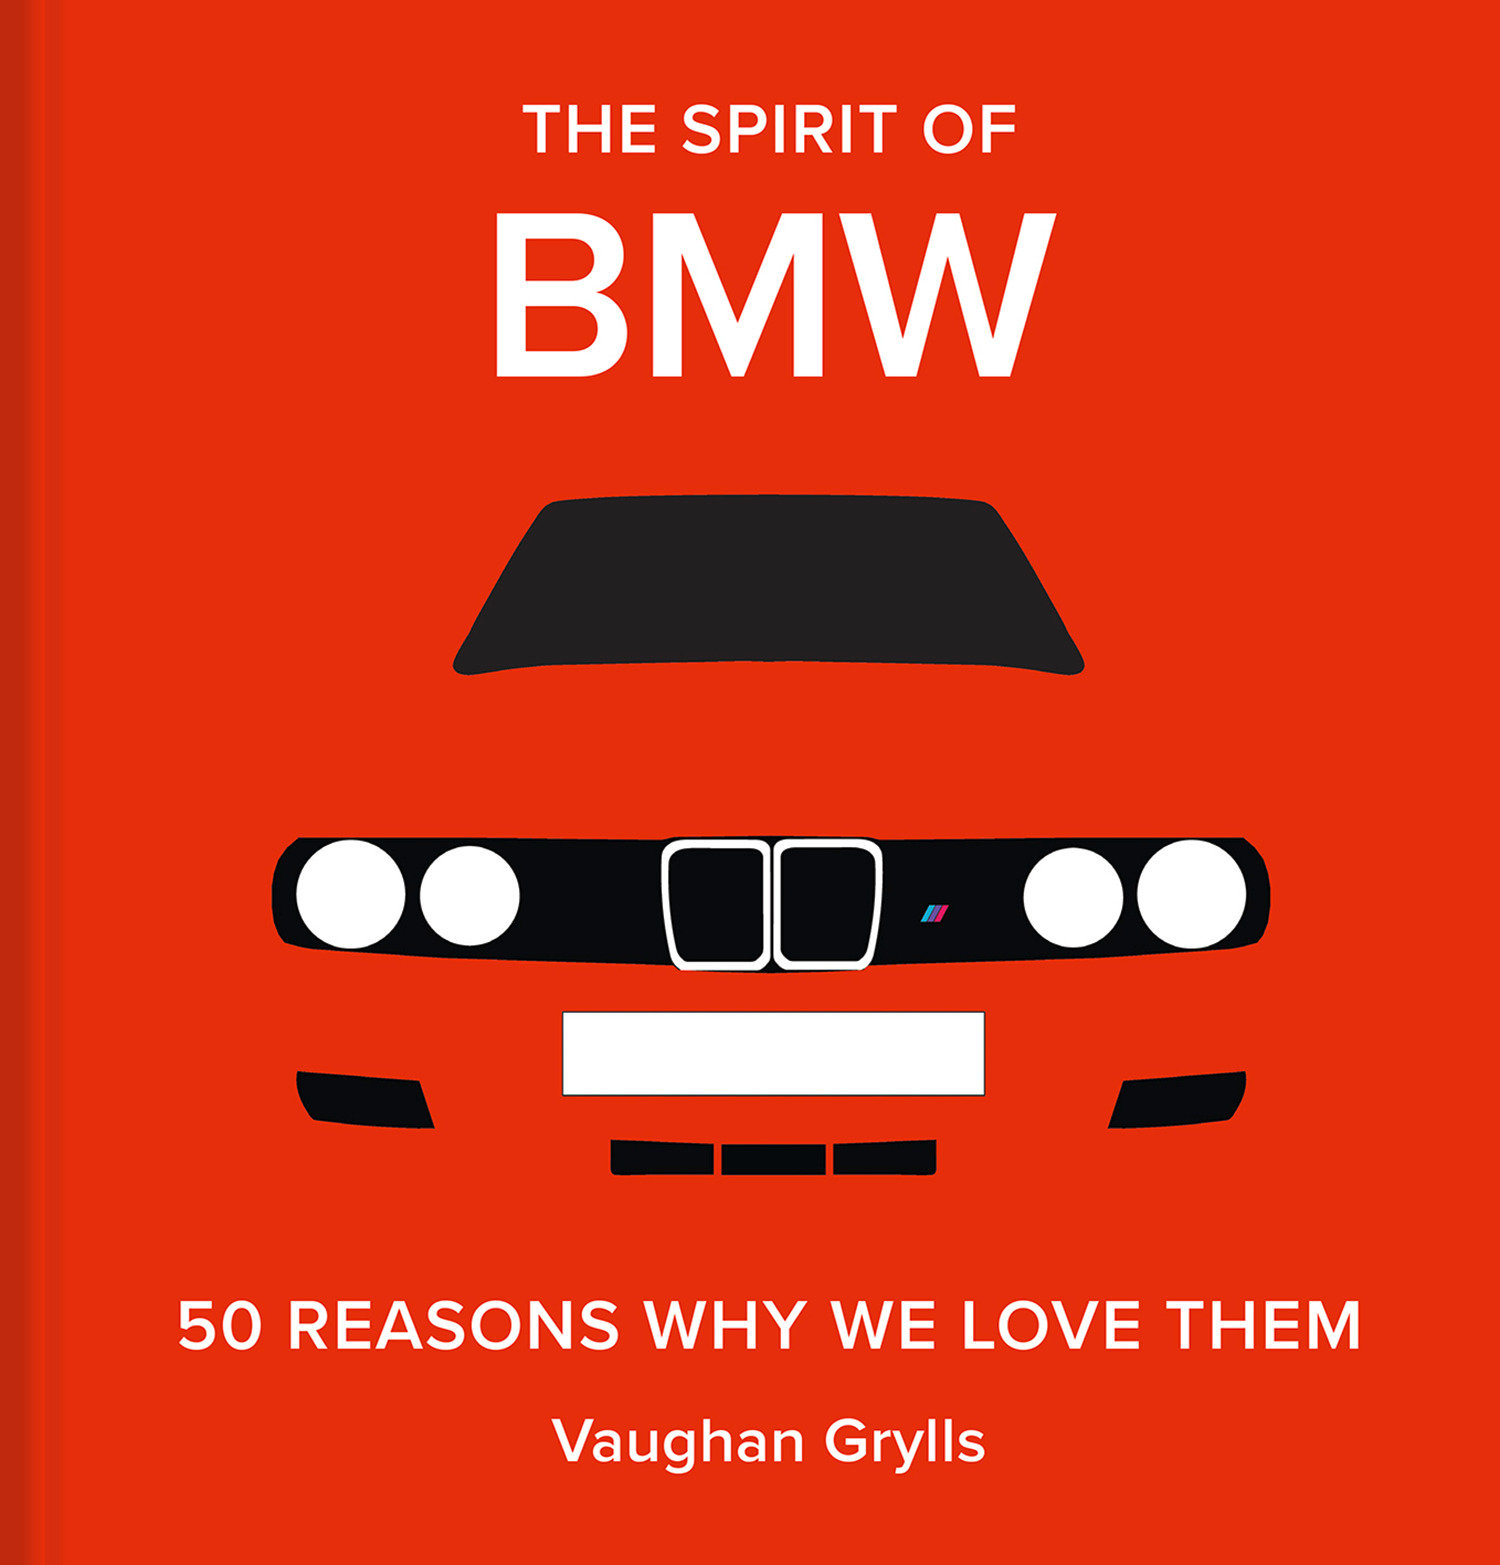 The Spirit Of Bmw (Hardcover Book)